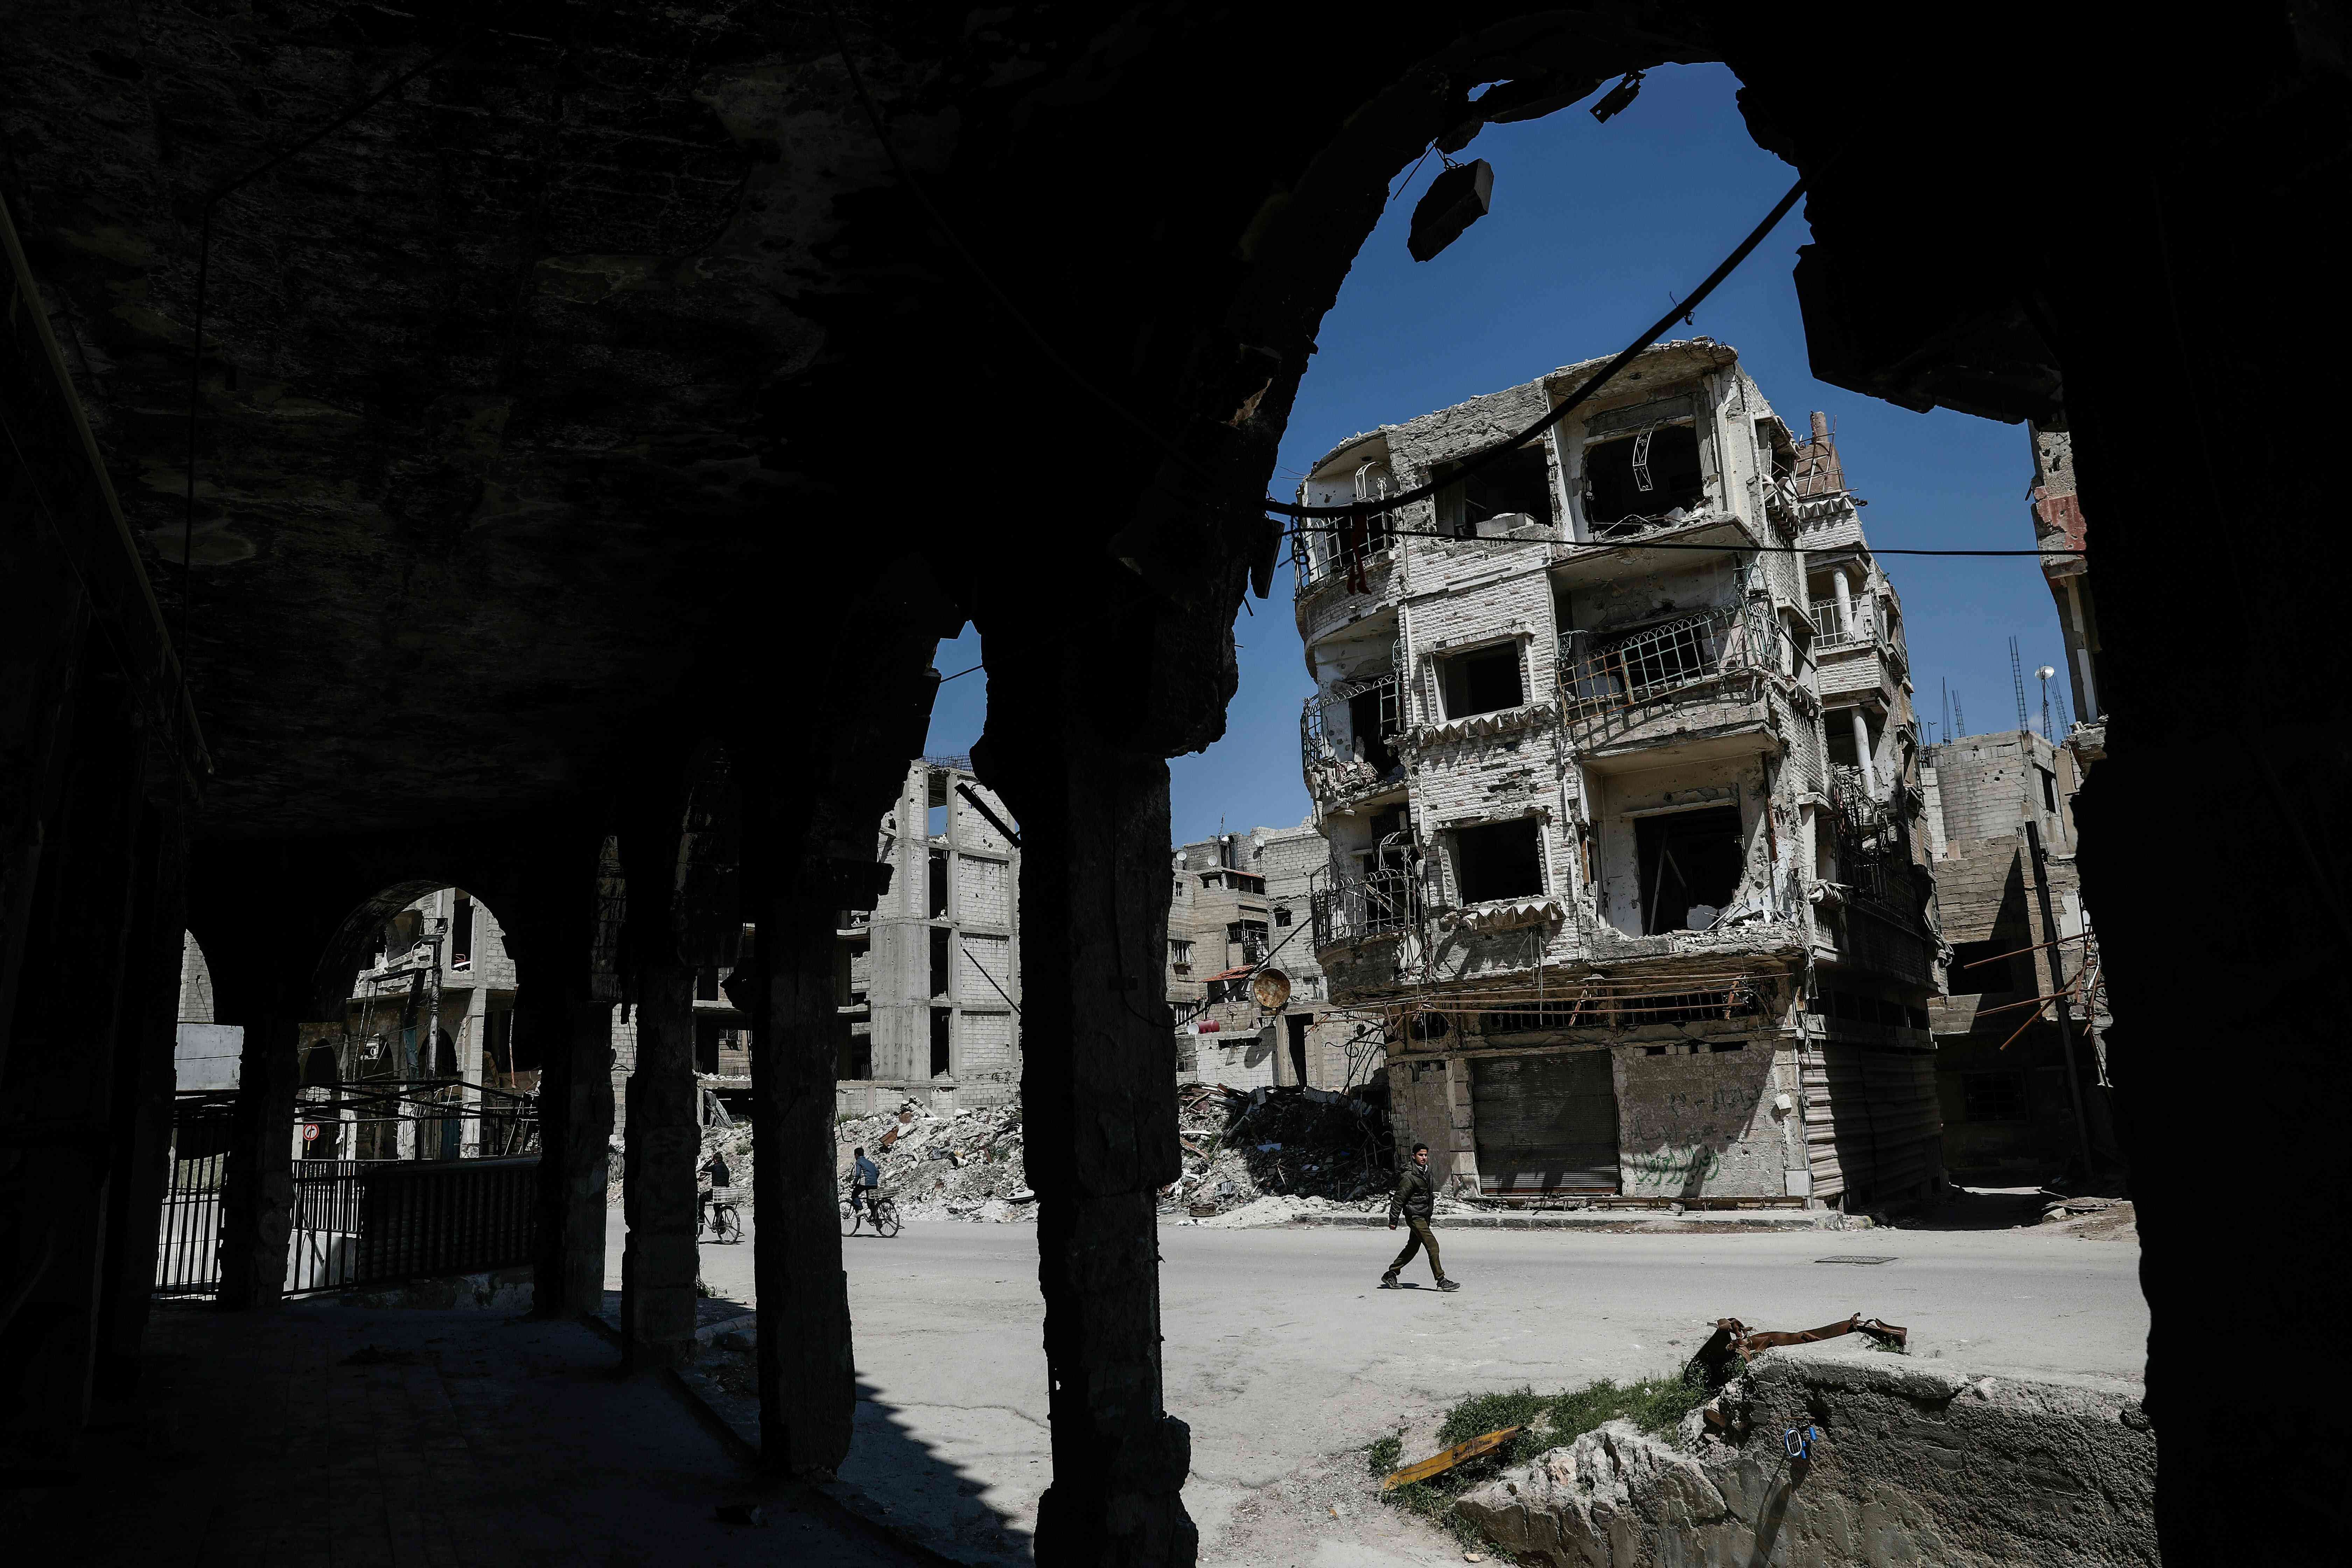 Syrians walk past damaged buildings on April 7 in the rebel-held town of Douma, on the eastern outskirts of Damascus. Photo: AFP